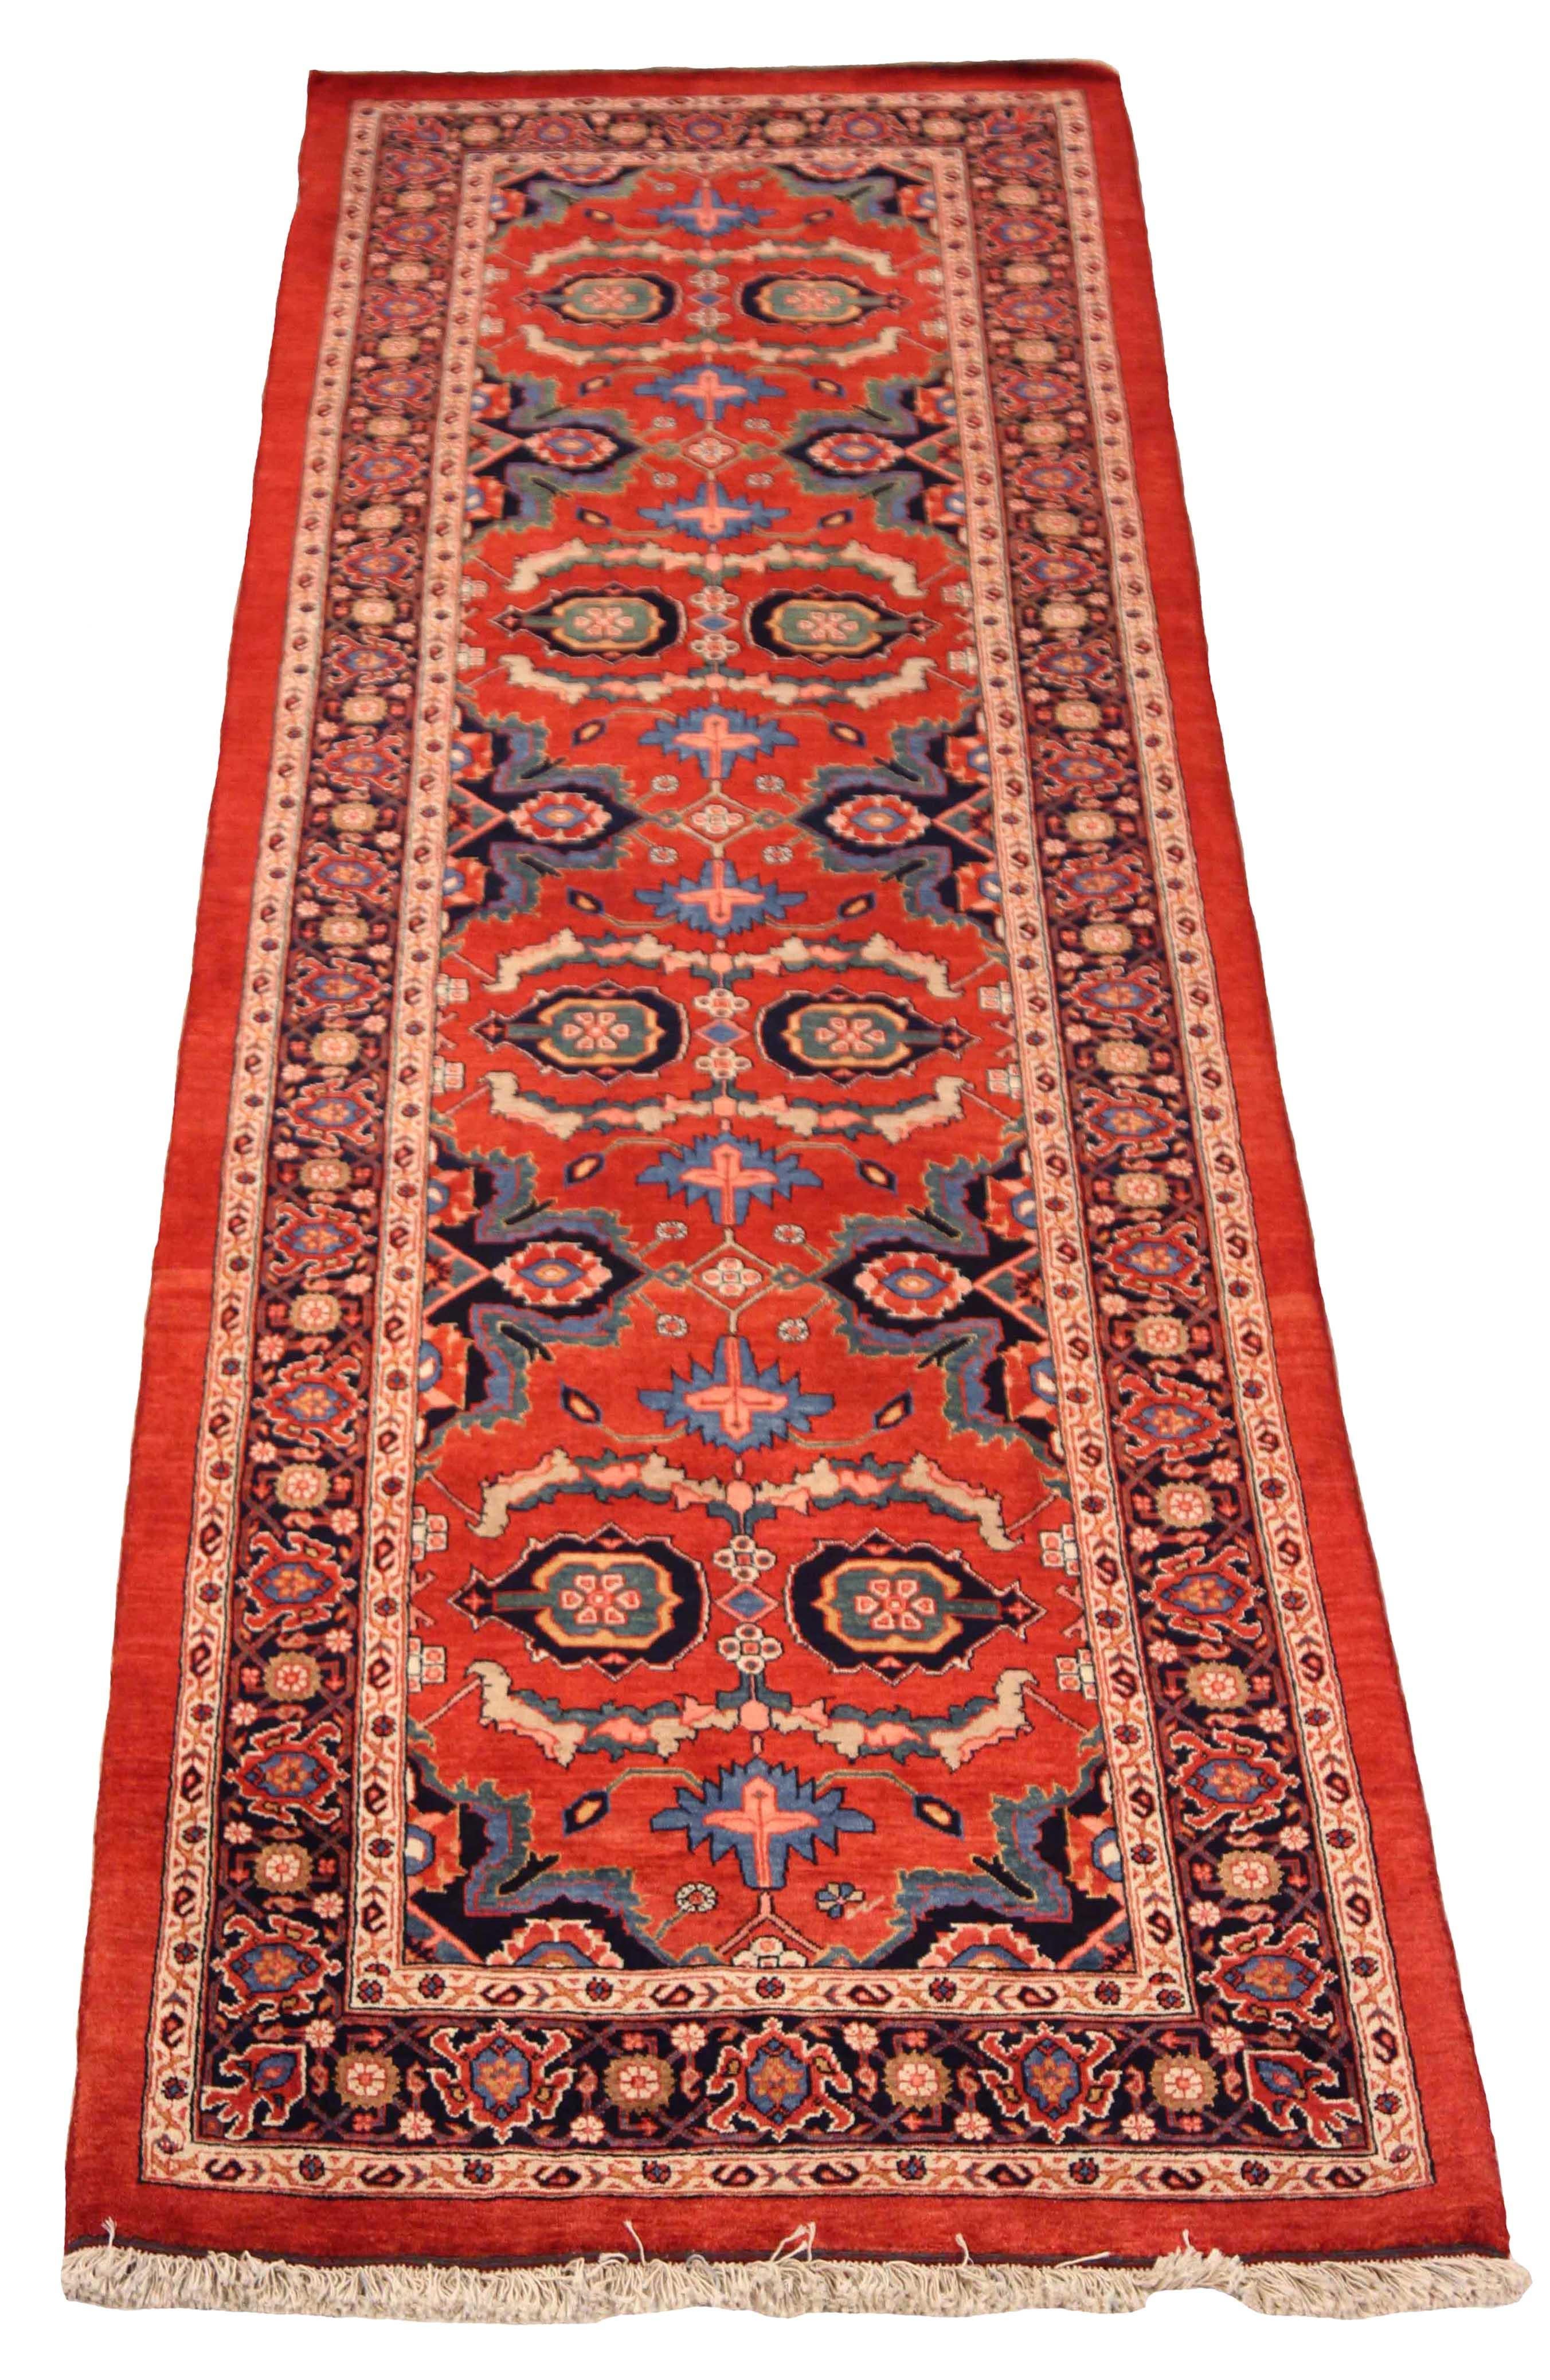 Antique Persian runner rug handwoven from the finest sheep’s wool. It’s colored with all-natural vegetable dyes that are safe for humans and pets. It’s a traditional Art Deco design handwoven by expert artisans. It’s a lovely runner rug that can be